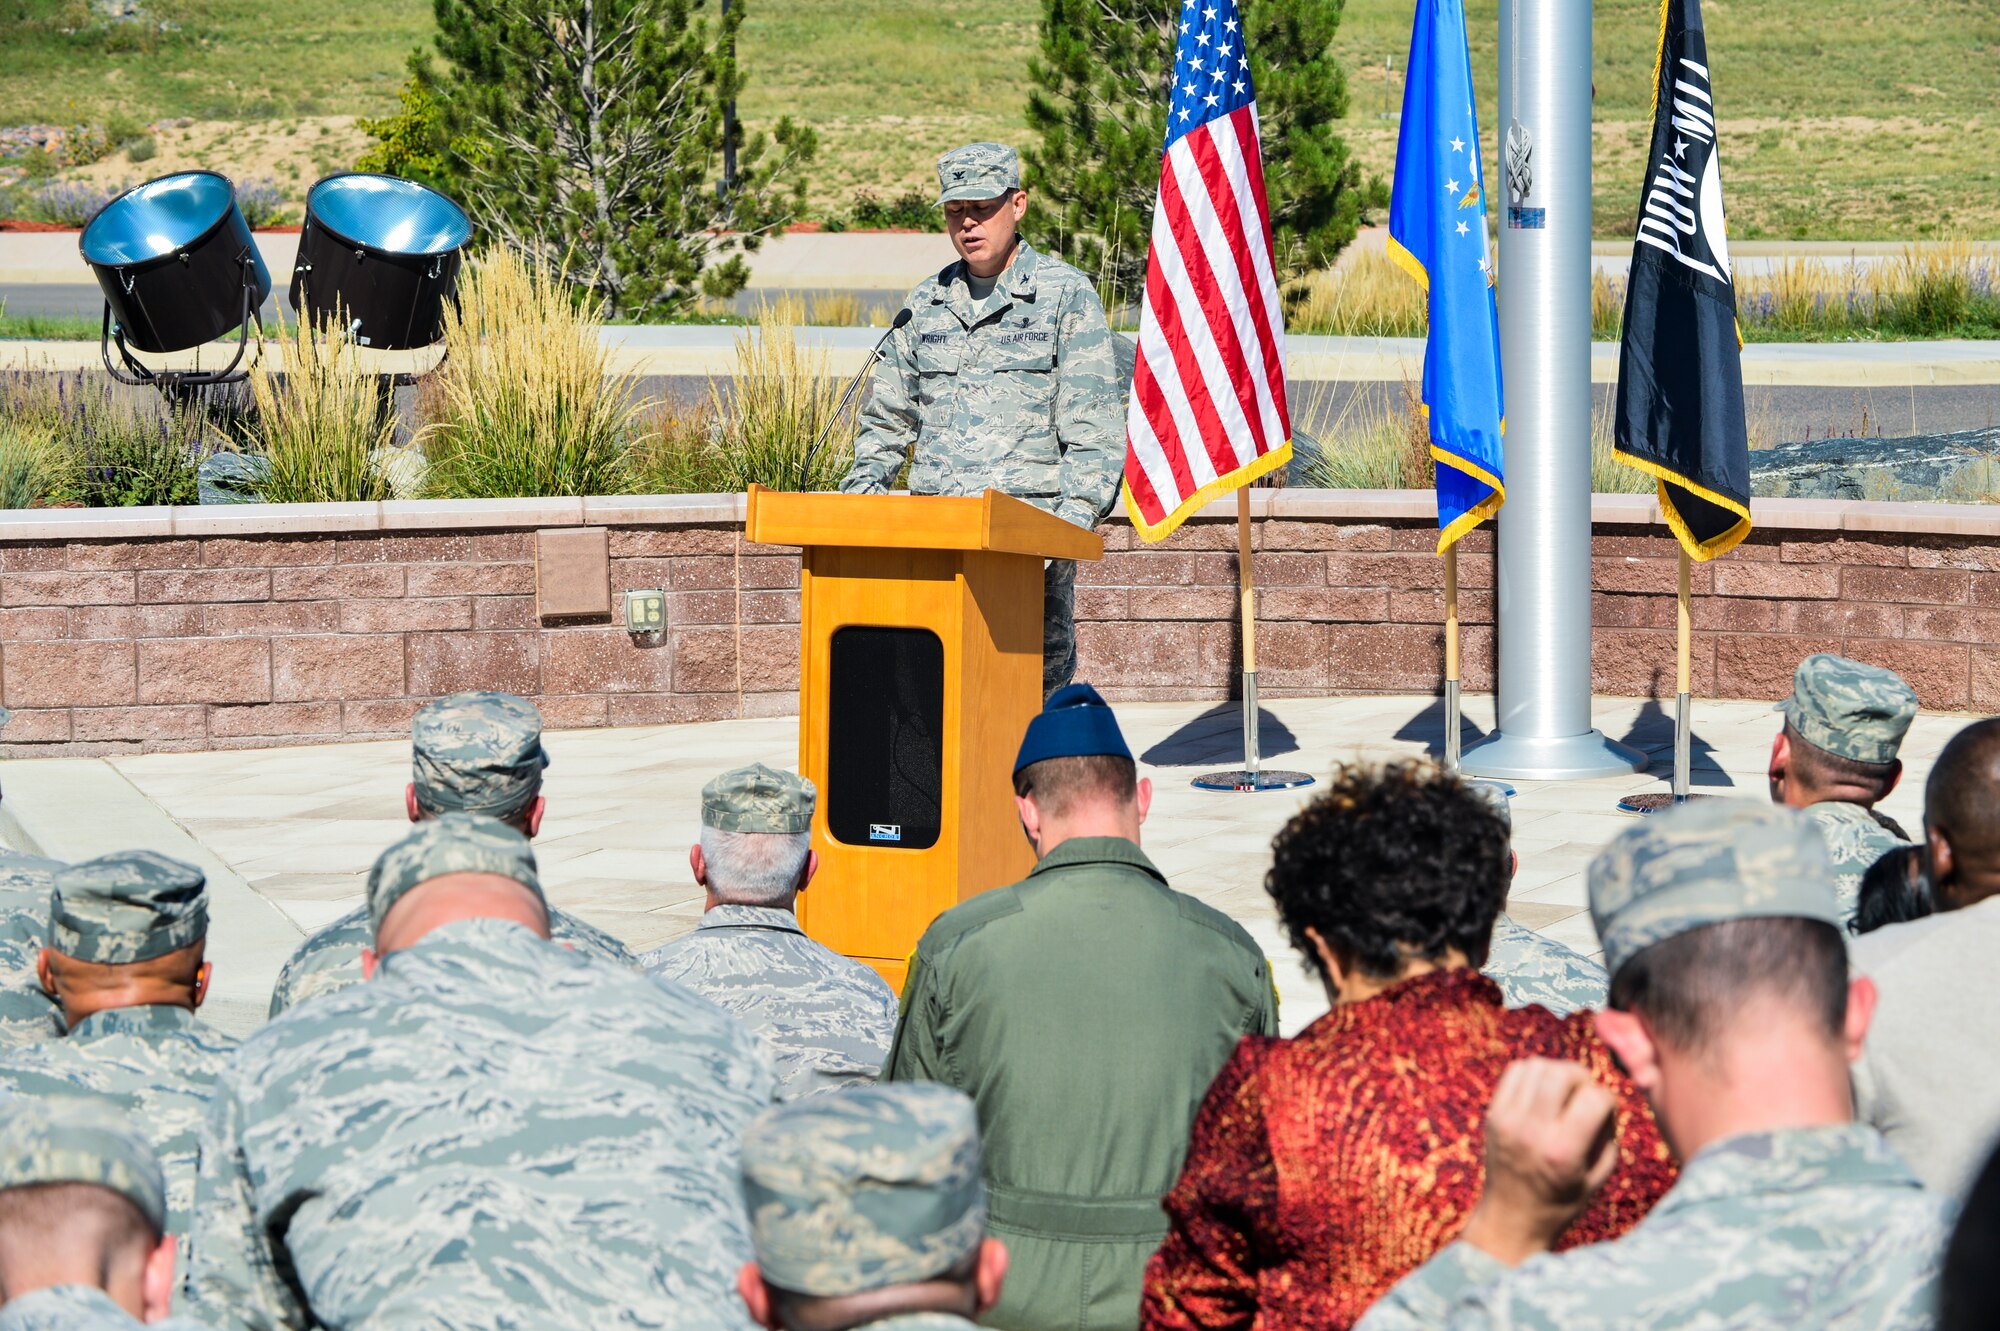 Col. Dan Wright, 460th Space Wing commander, gave closing remarks during the National POW/MIA Recognition Day ceremony Sept. 20, 2013, at the 460th Space Wing headquarters building on Buckley Air Force Base, Colo. National POW/MIA Recognition Day is acknowledged around the world on military installations and ships, and in state capitols, schools and veterans’ facilities. (U.S. Air Force photo by Staff Sgt. Paul Labbe/Released)